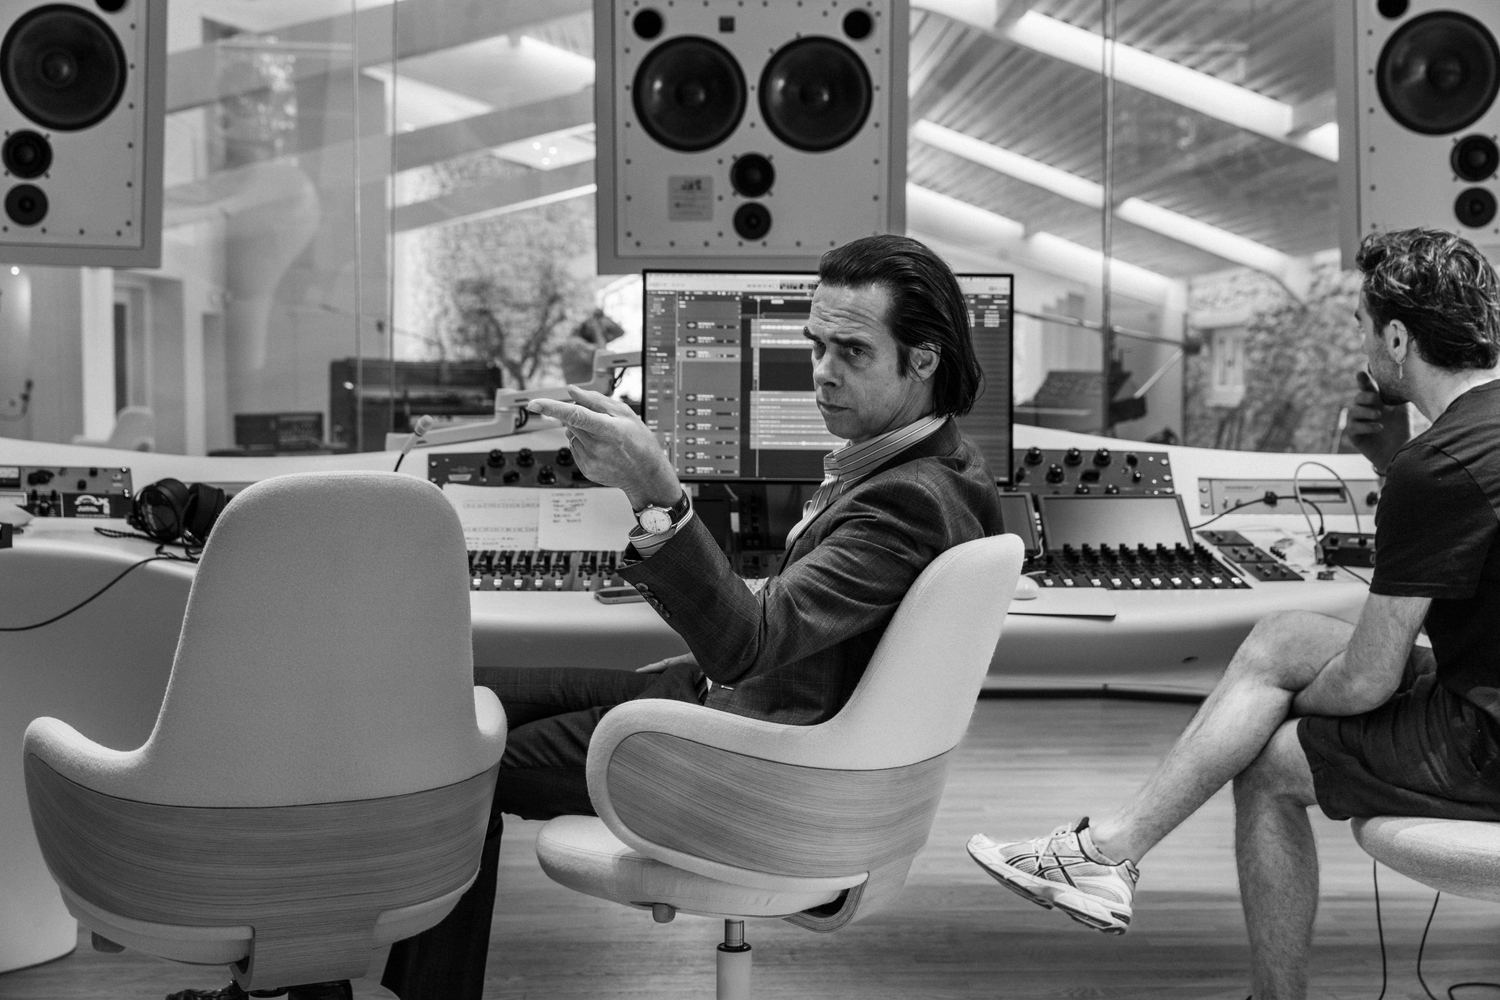 Nick Cave & The Bad Seeds share new single 'Frogs', lifted from forthcoming album 'Wild God'